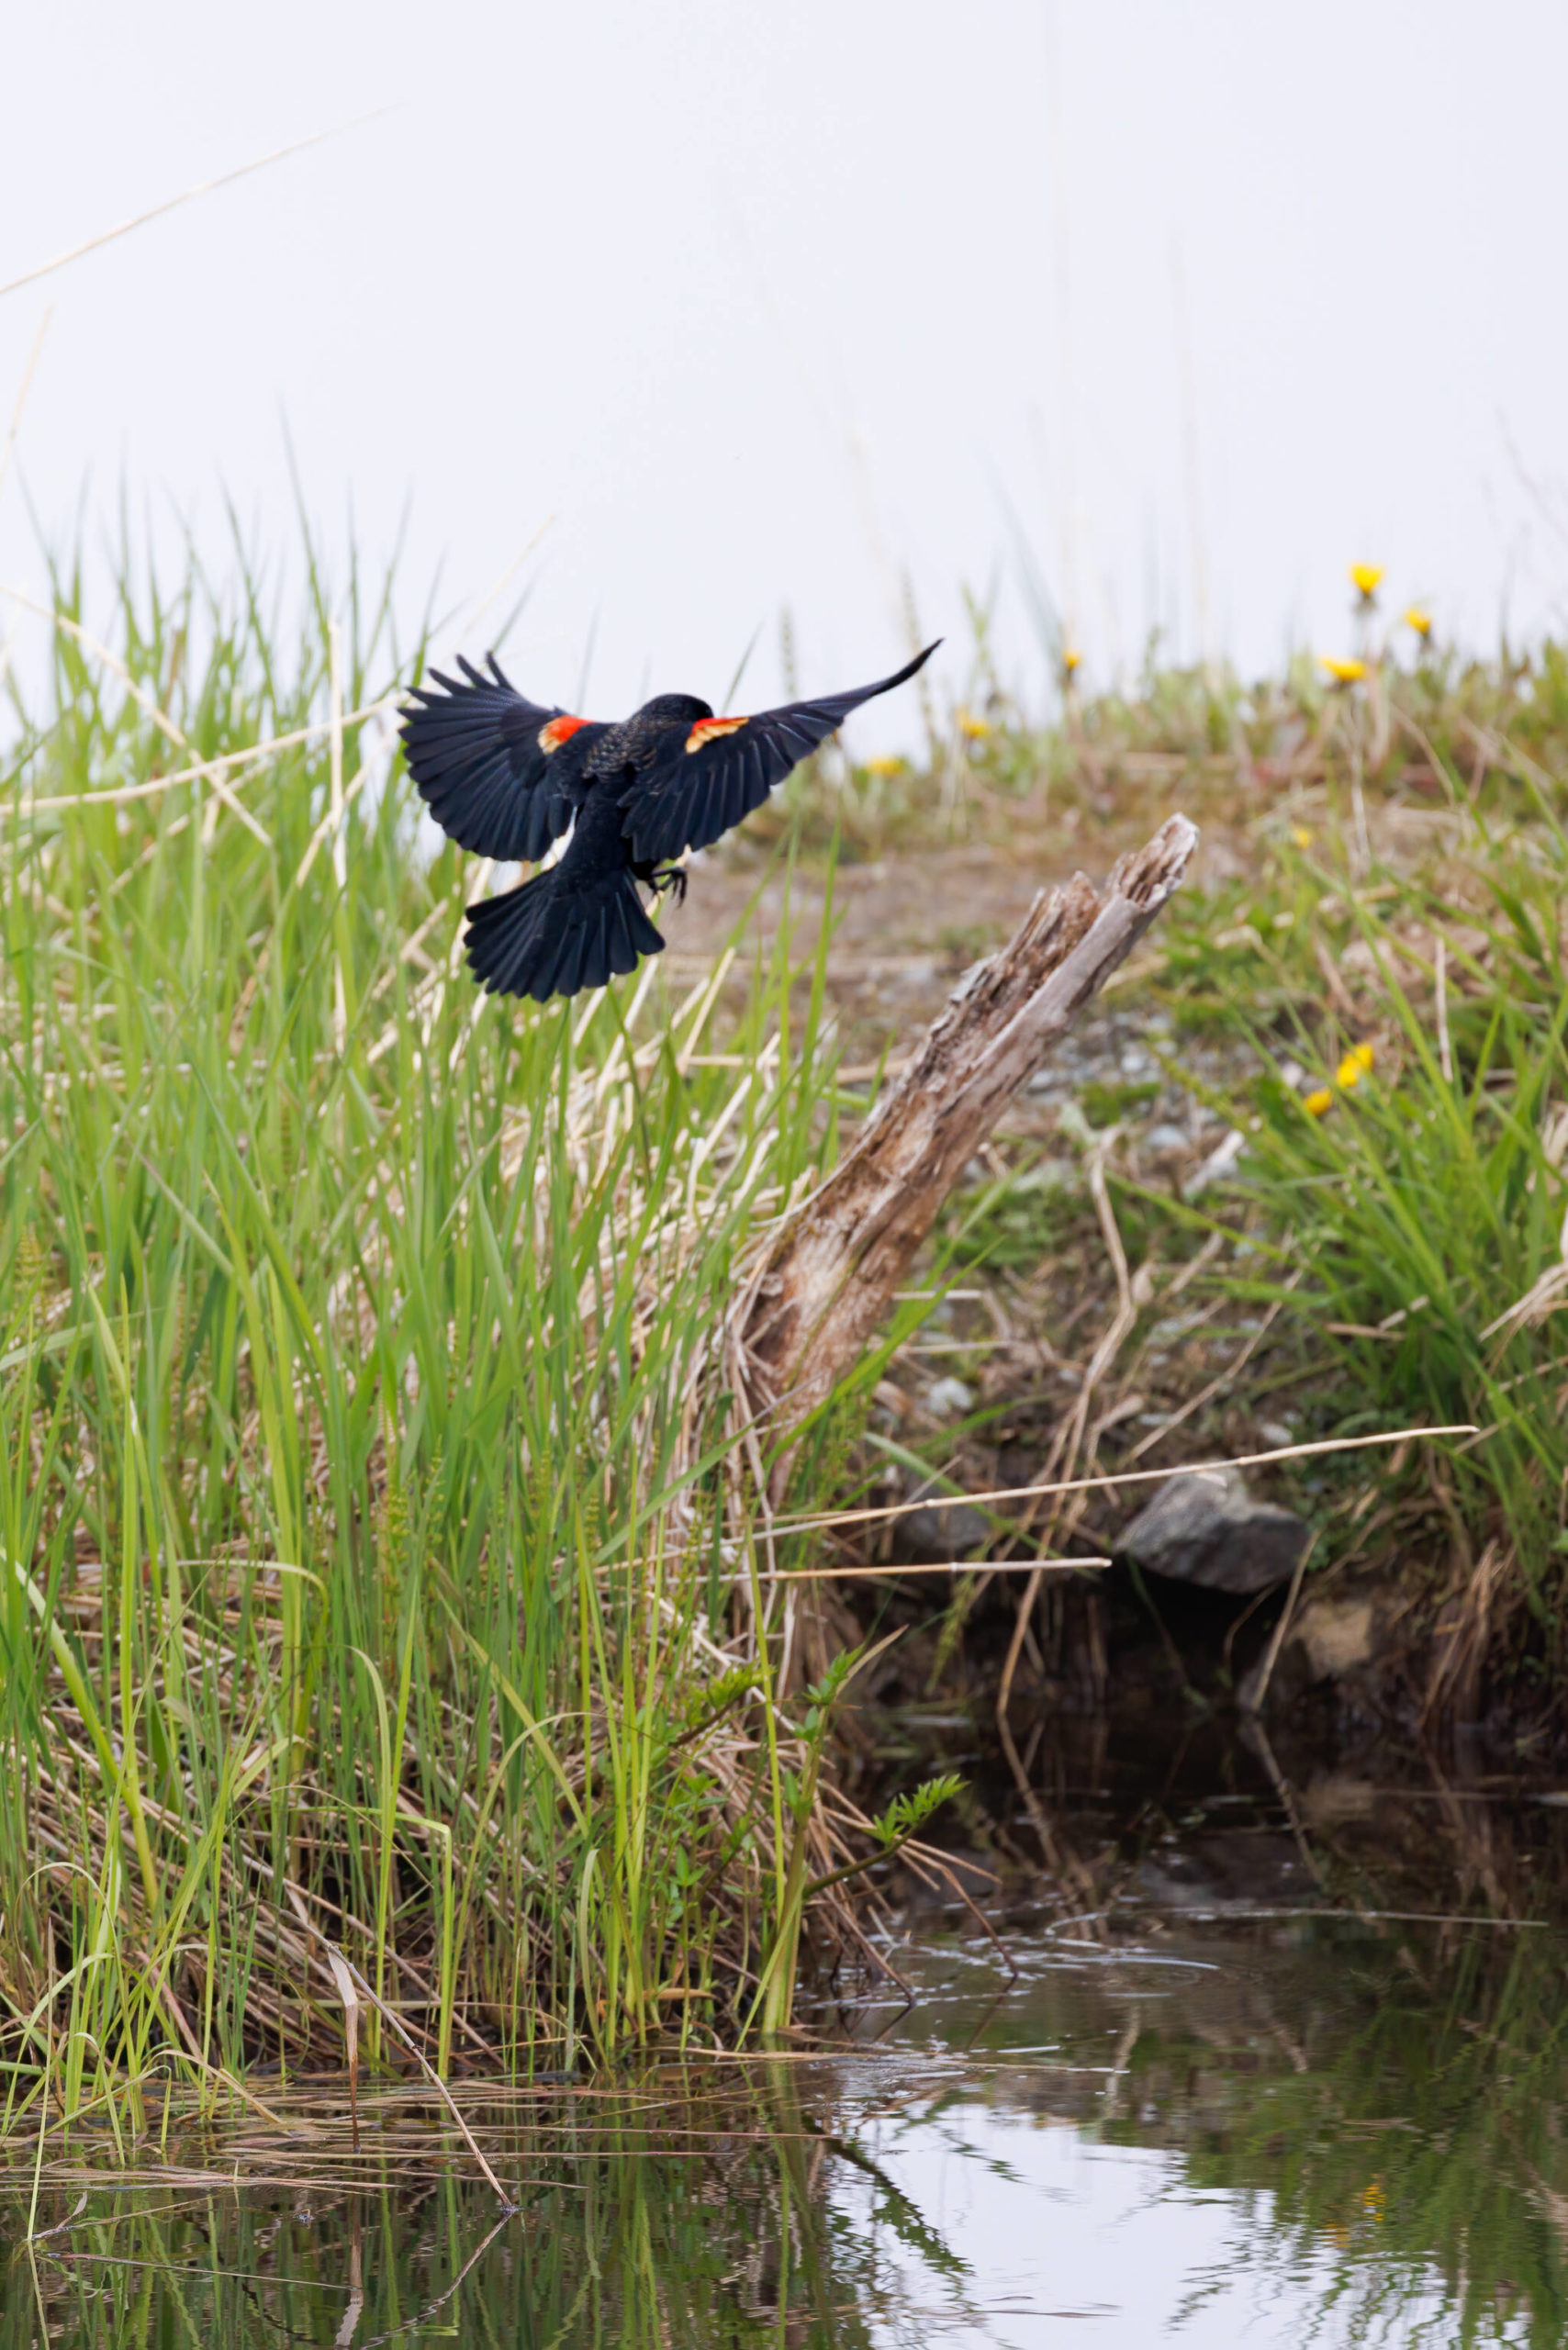 A red-winged blackbird comes in for a landing on a snag at the edge of the pond. (Courtesy Photo / Gina Vose)